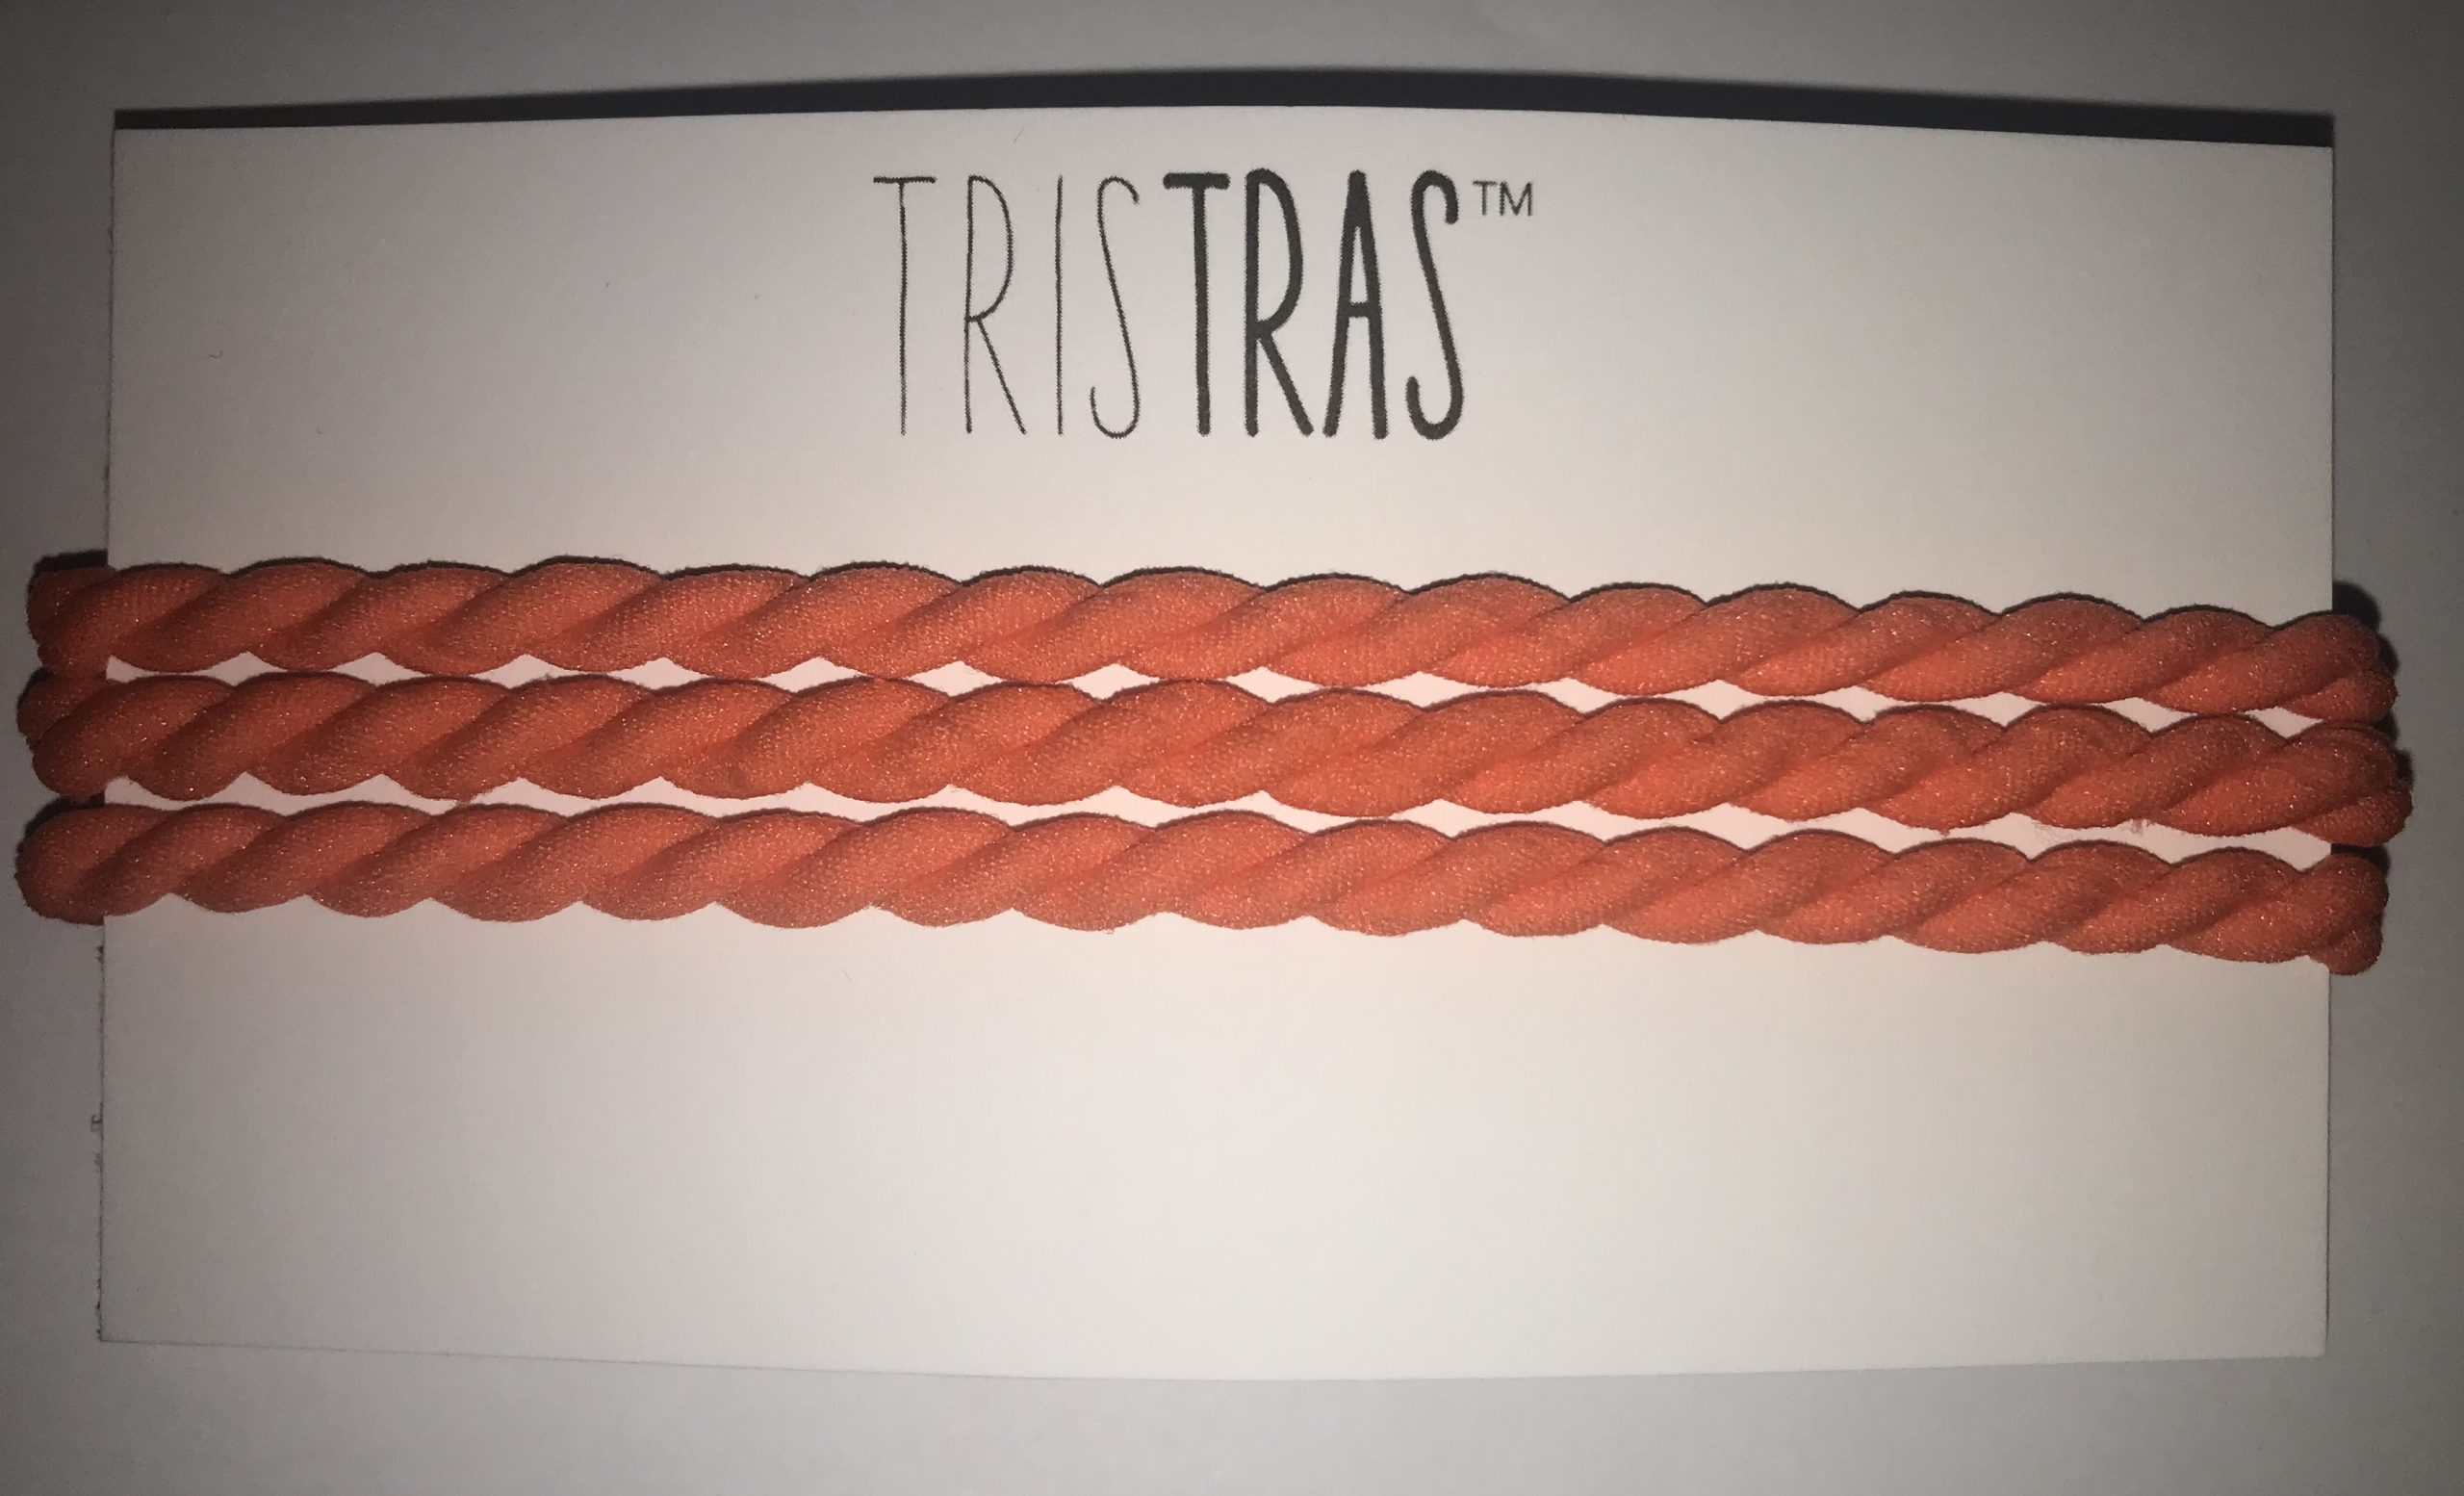 Featured image for “TrisTras set 24”